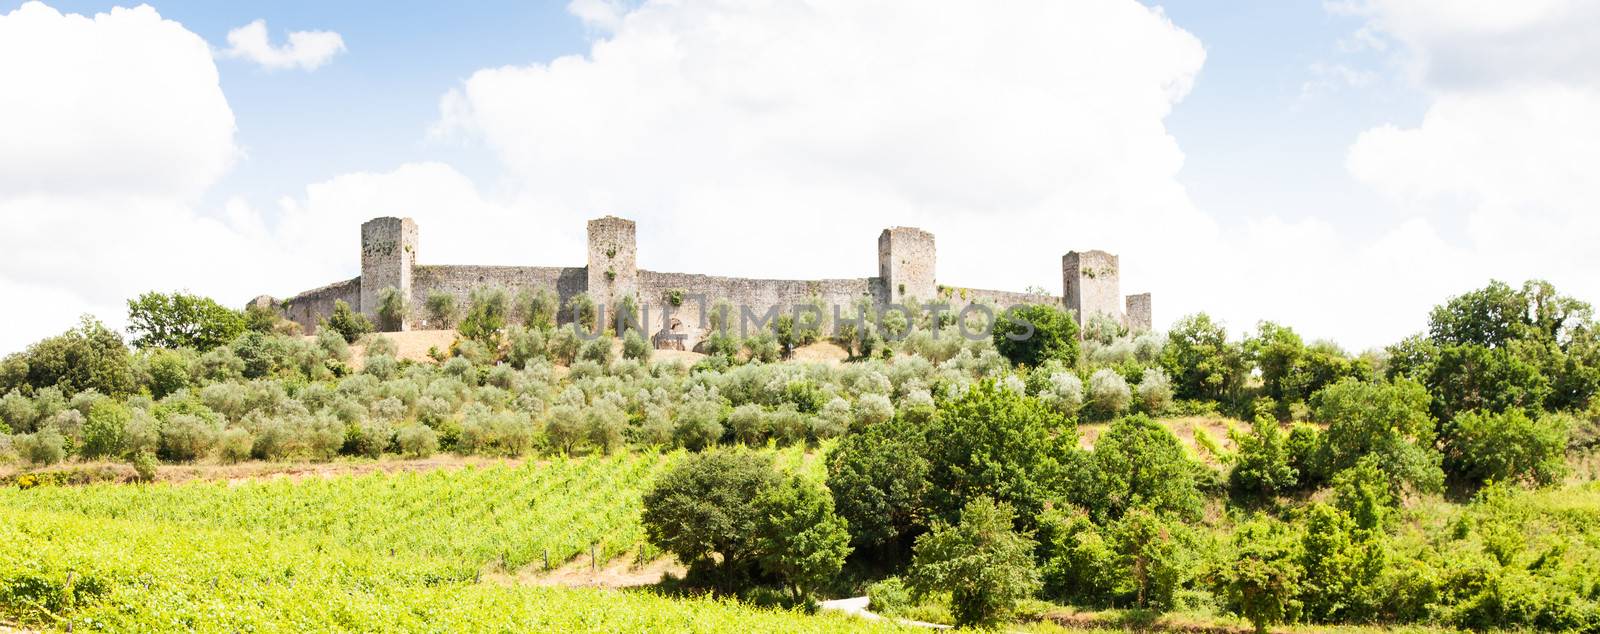 Monteriggioni, Tuscany region, Italy. Wineyard in front of the ancient medieval walls